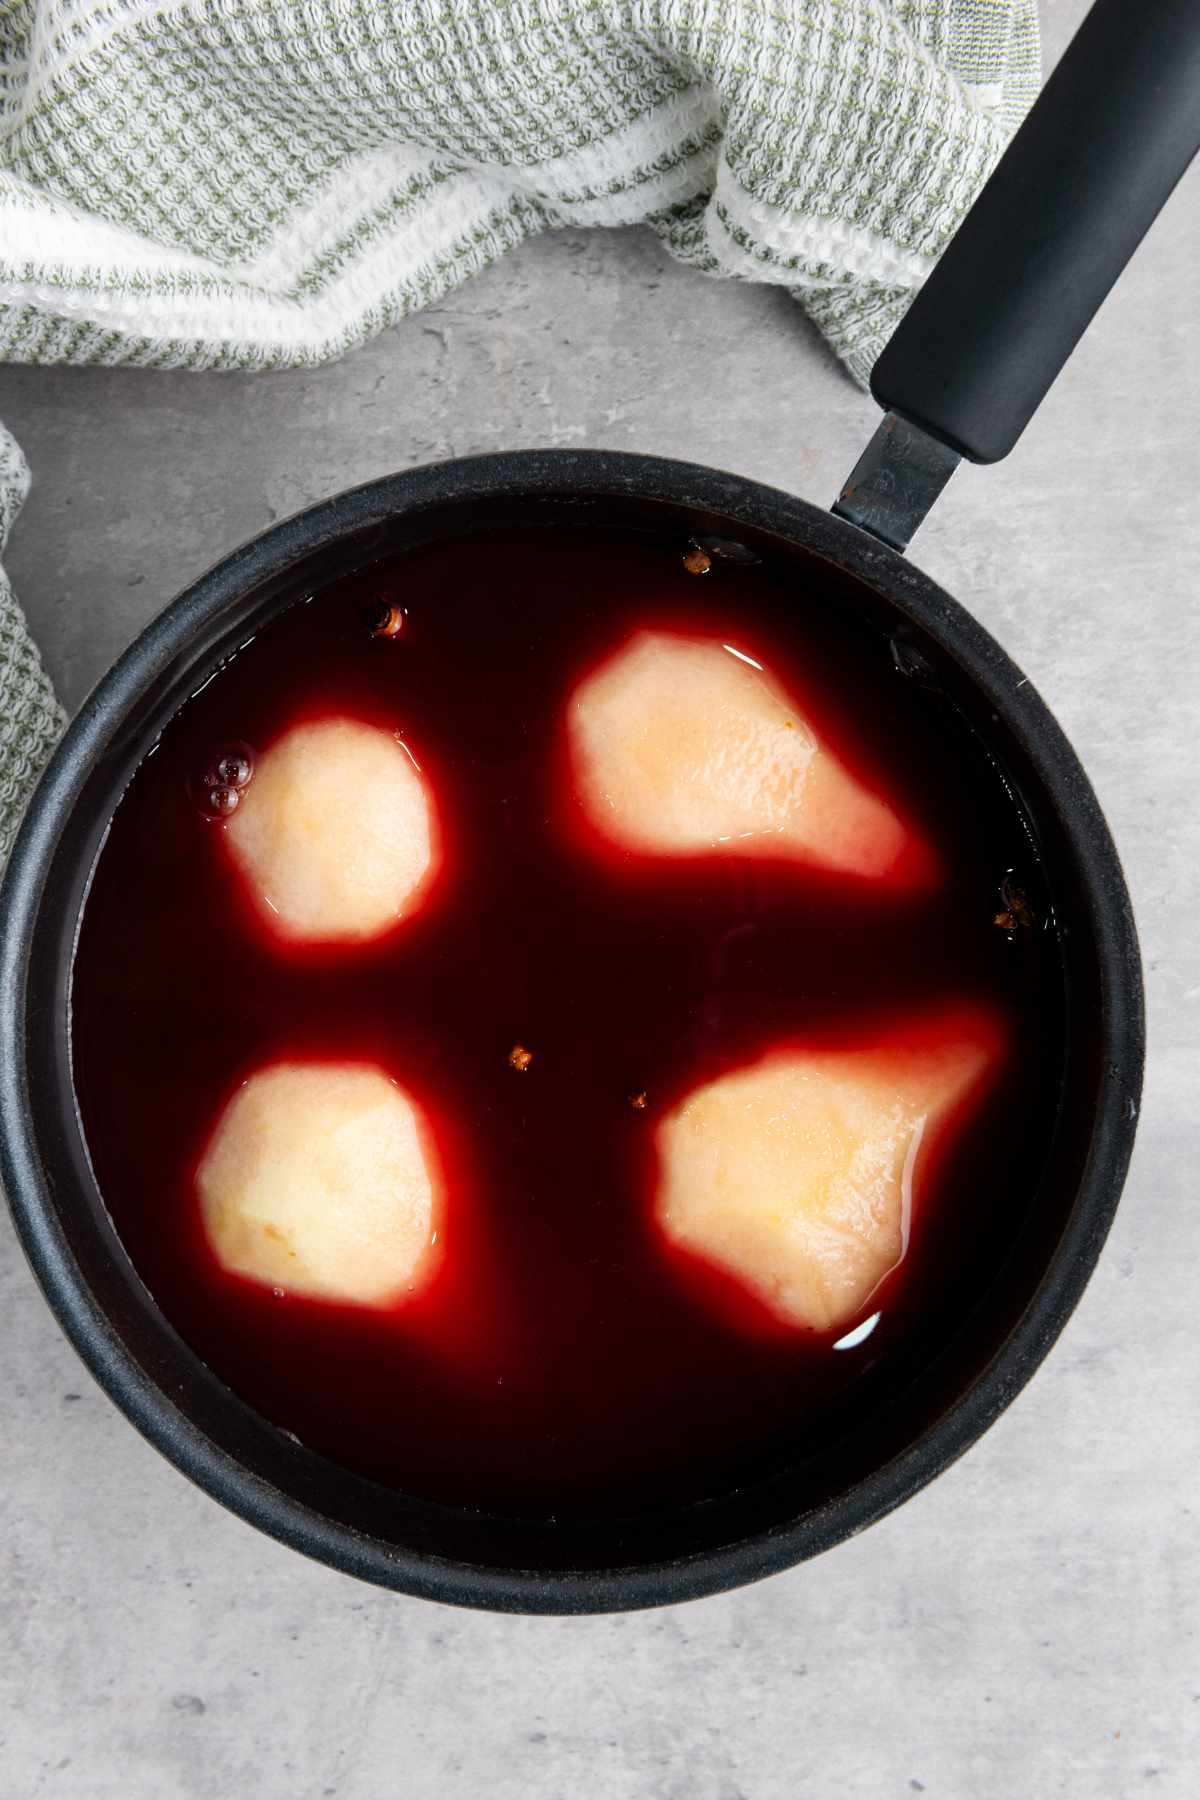 pears in the sauce pan of wine.